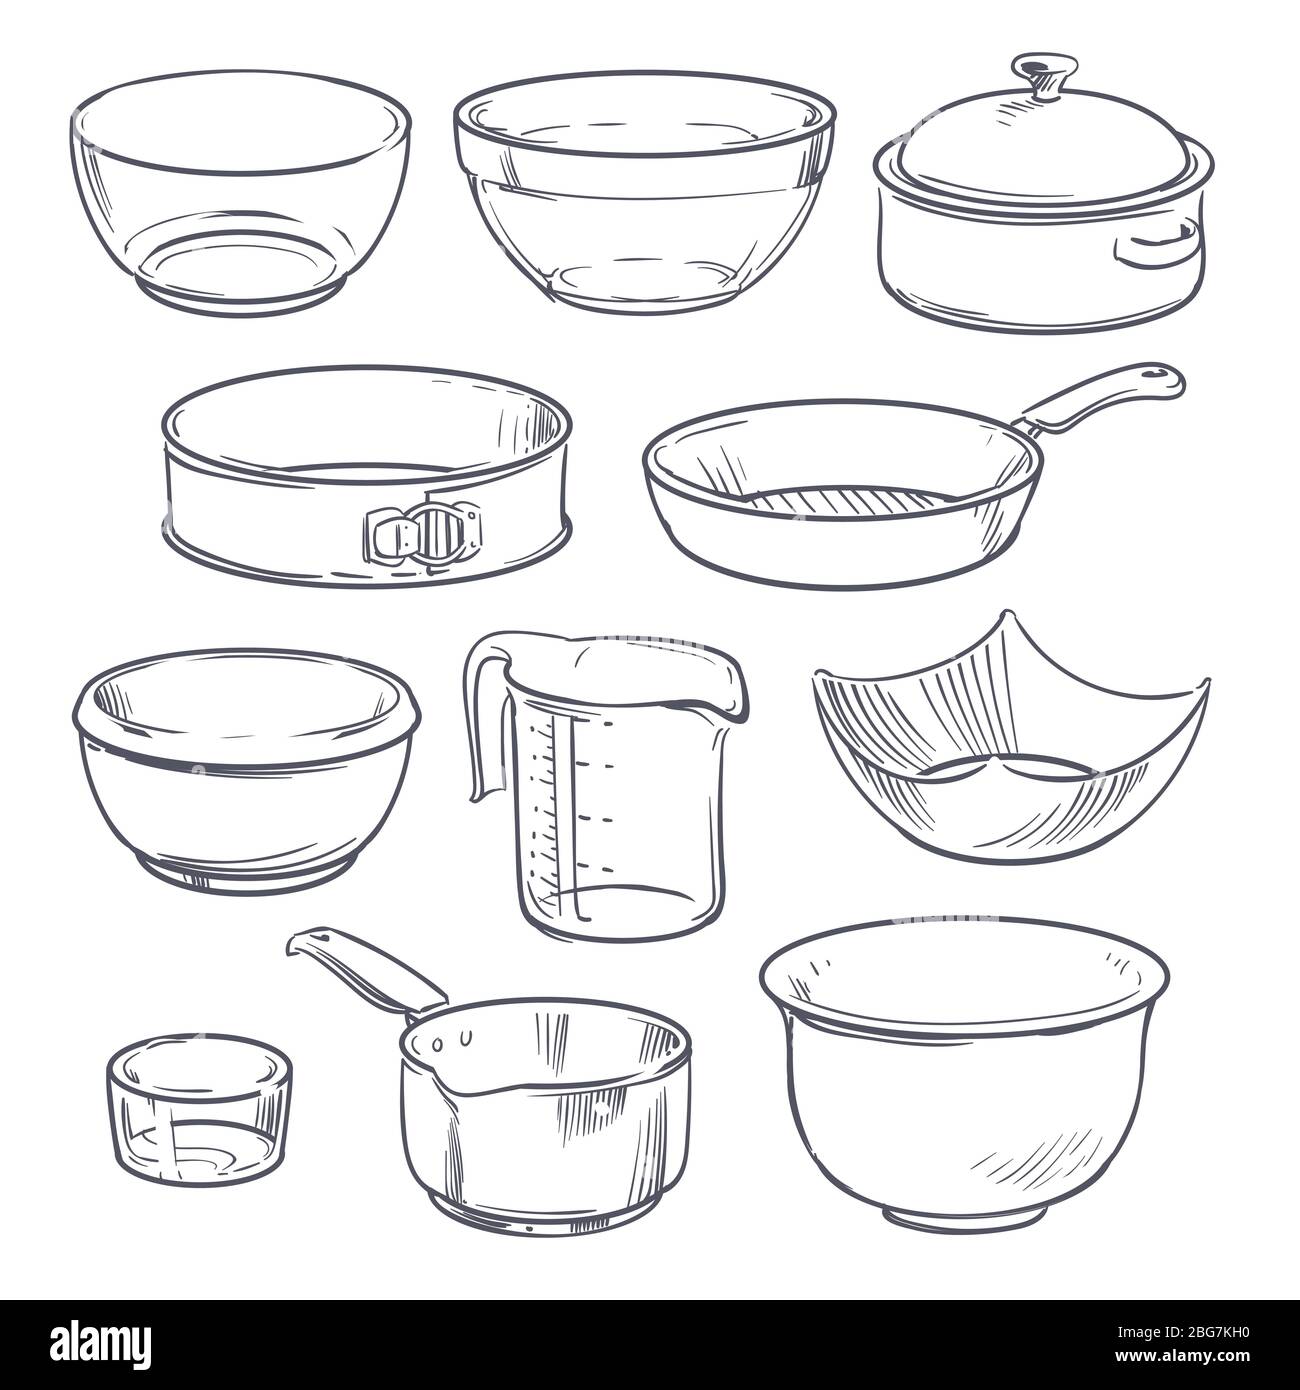 Doodle plastic and glass bowls, pot and frying pan. Vintage hand drawn vector cookware isolated. Bowl for cooking, utensil and dishware illustration Stock Vector